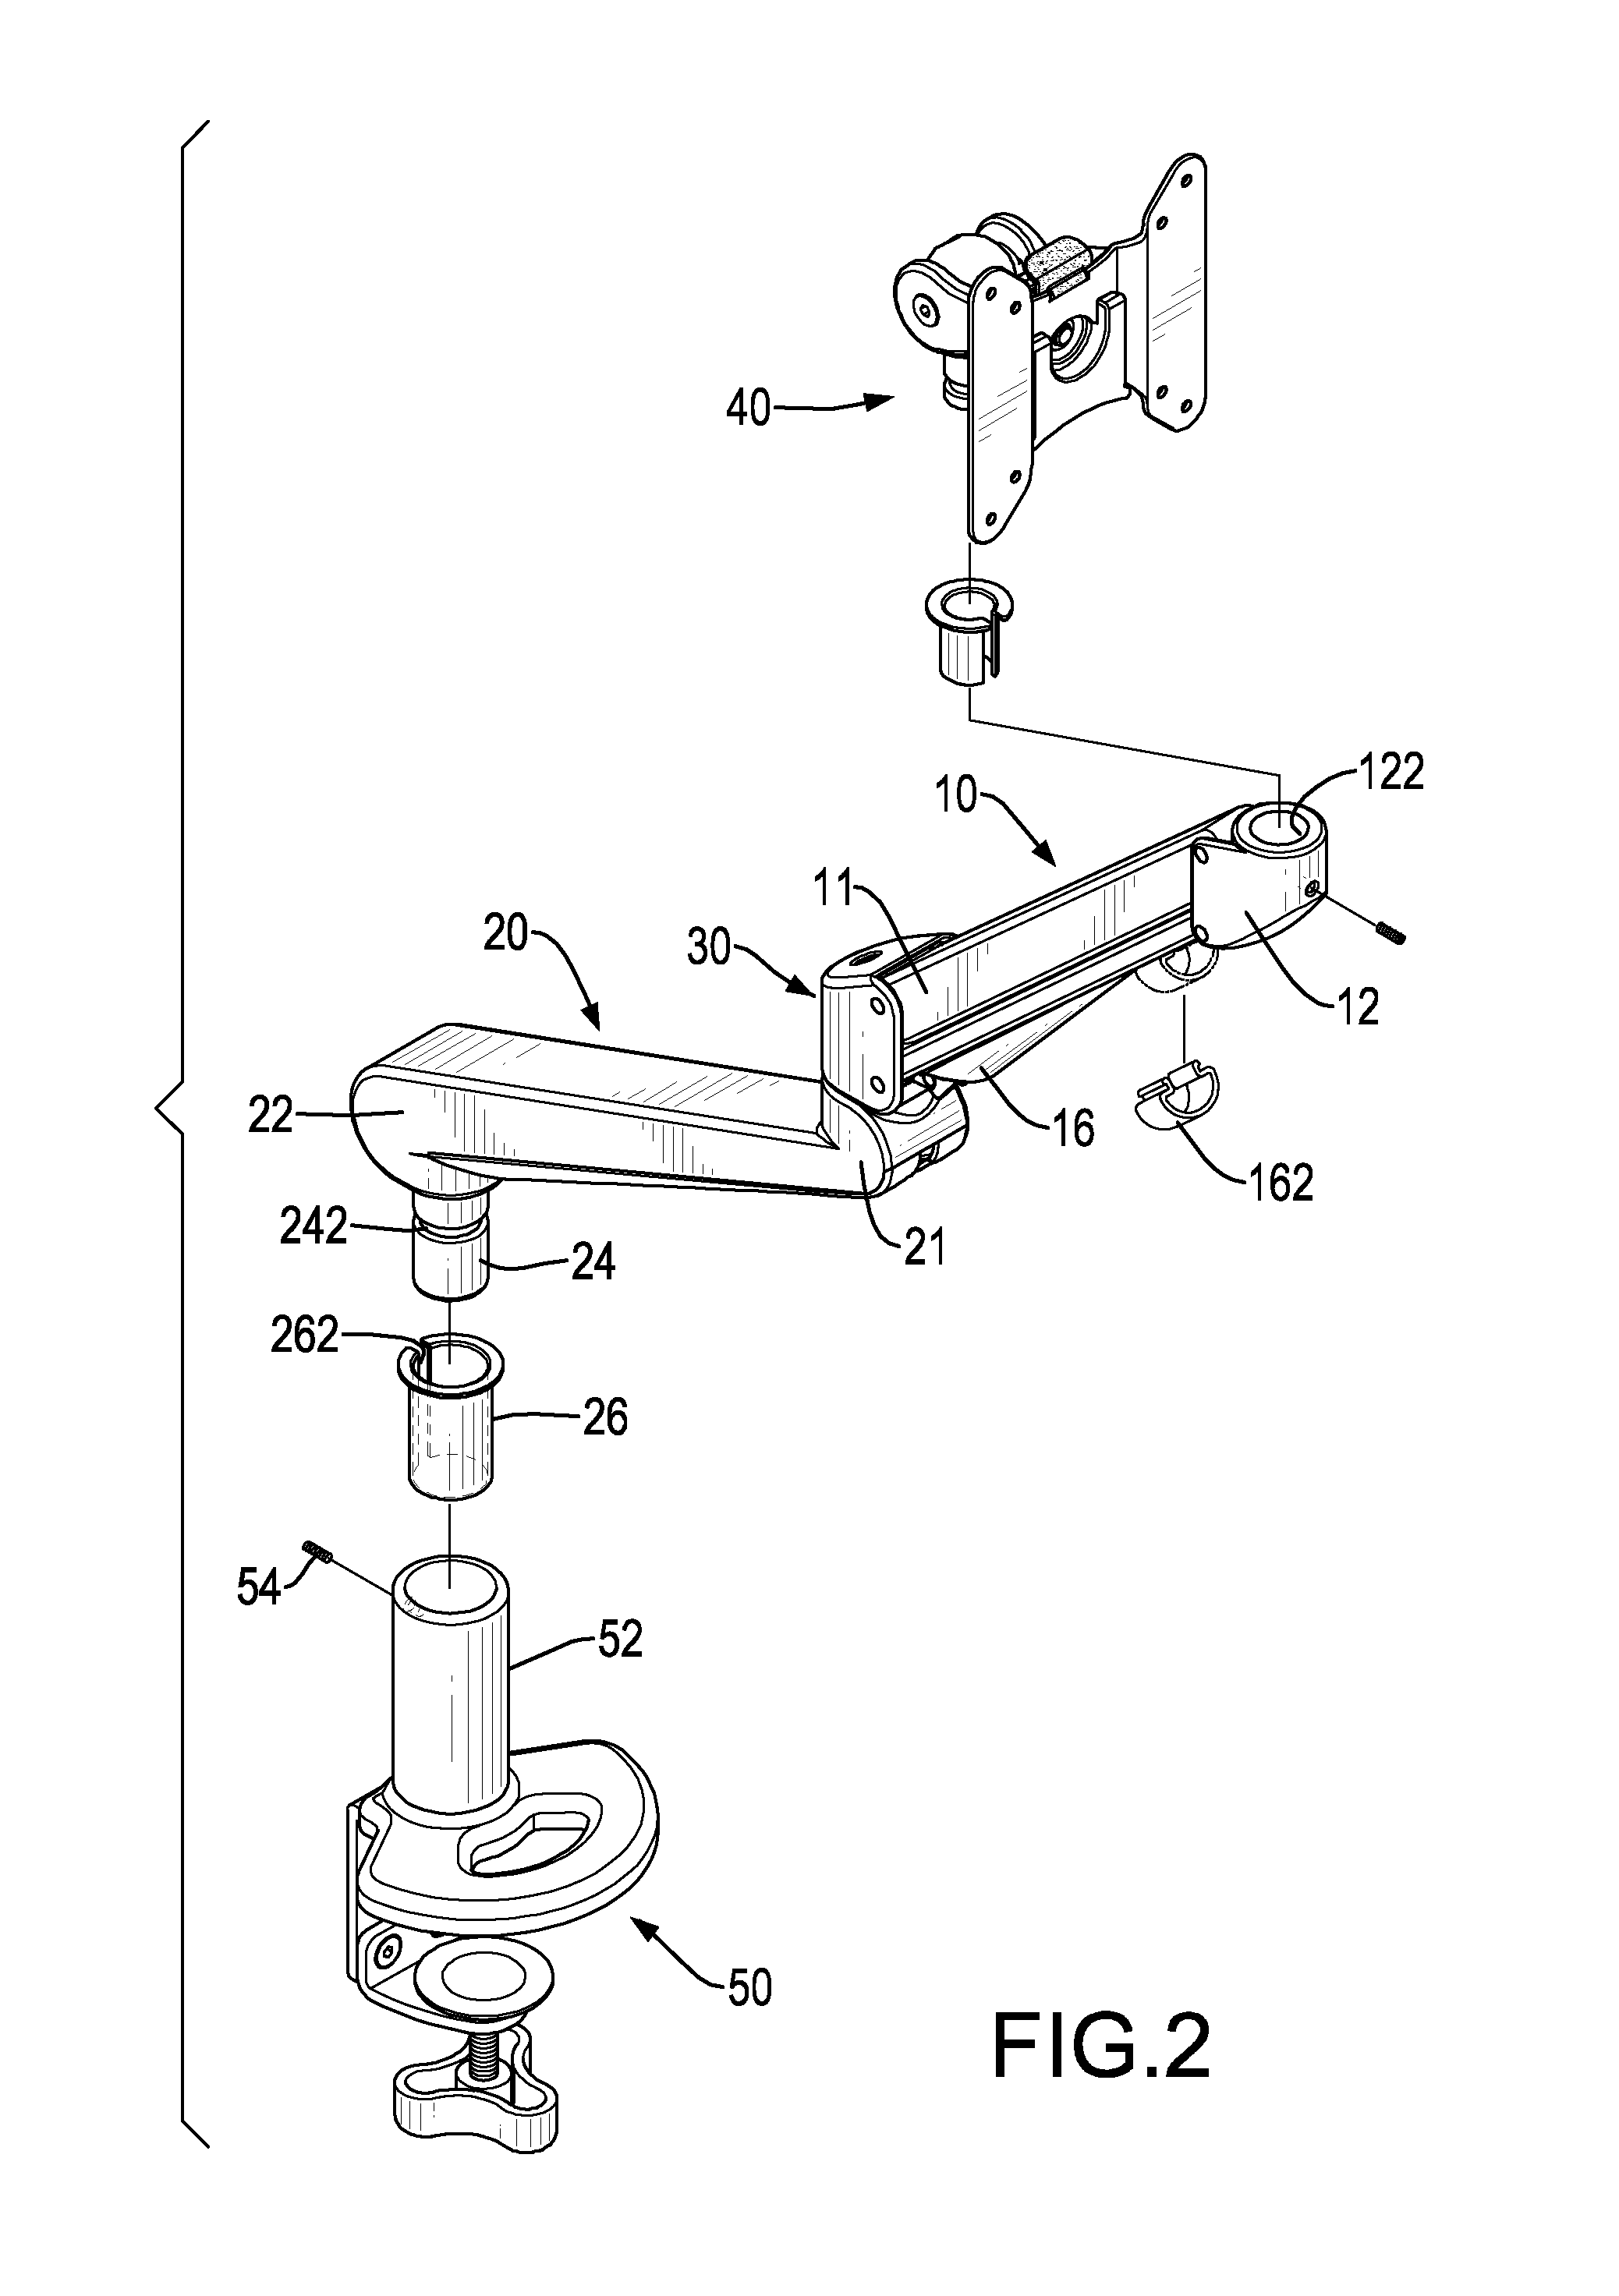 Supporting arm assembly for a display